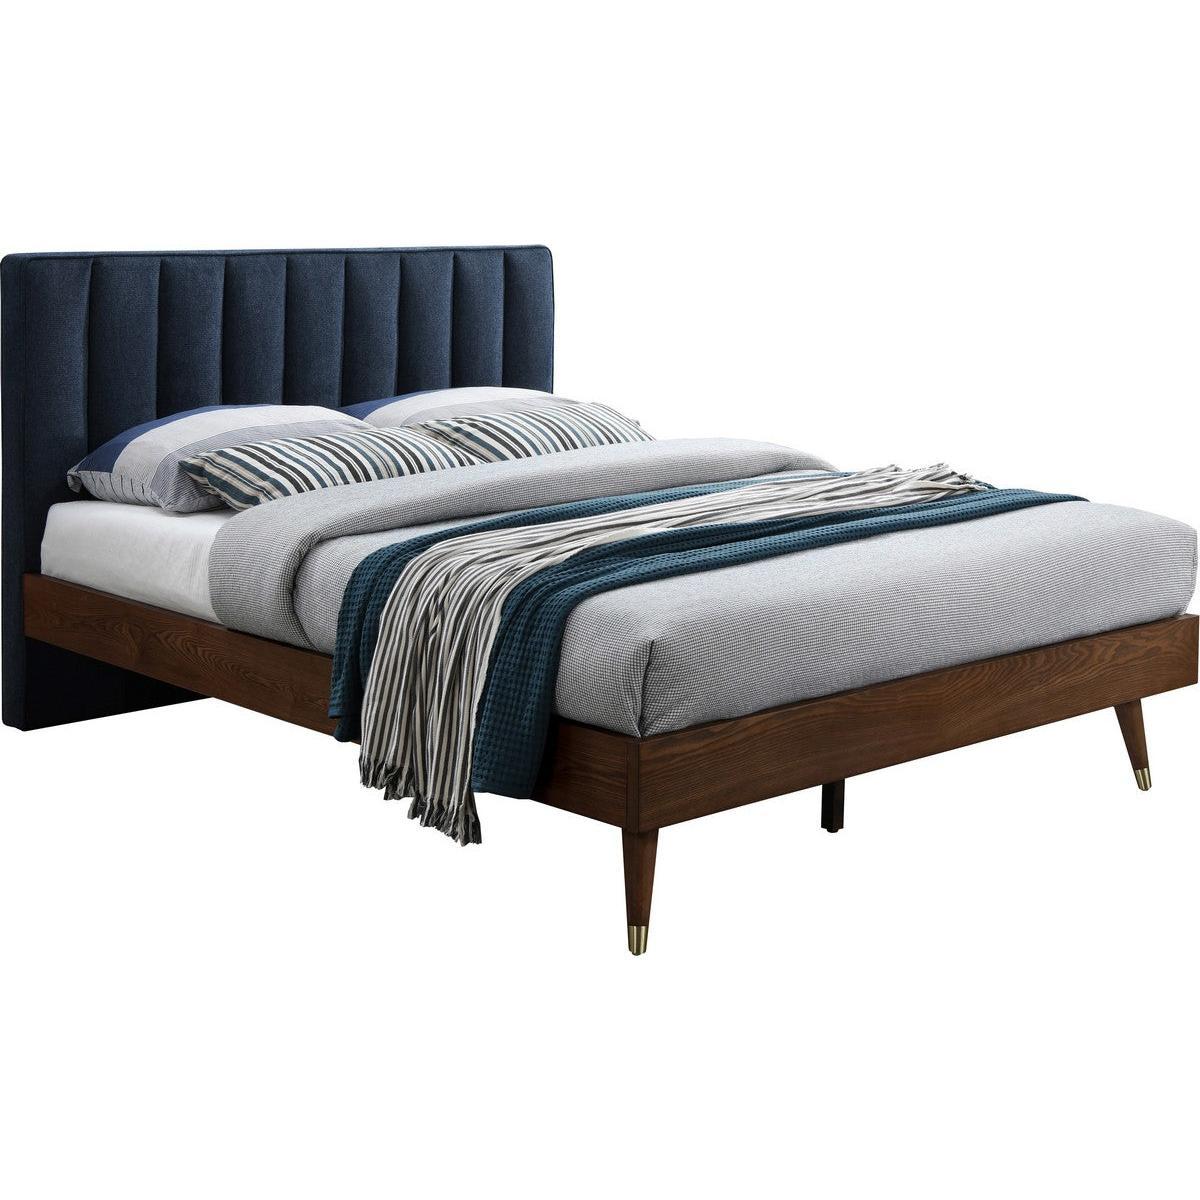 Meridian Furniture Vance Navy Linen Fabric King Bed (3 Boxes)Meridian Furniture - King Bed (3 Boxes) - Minimal And Modern - 1